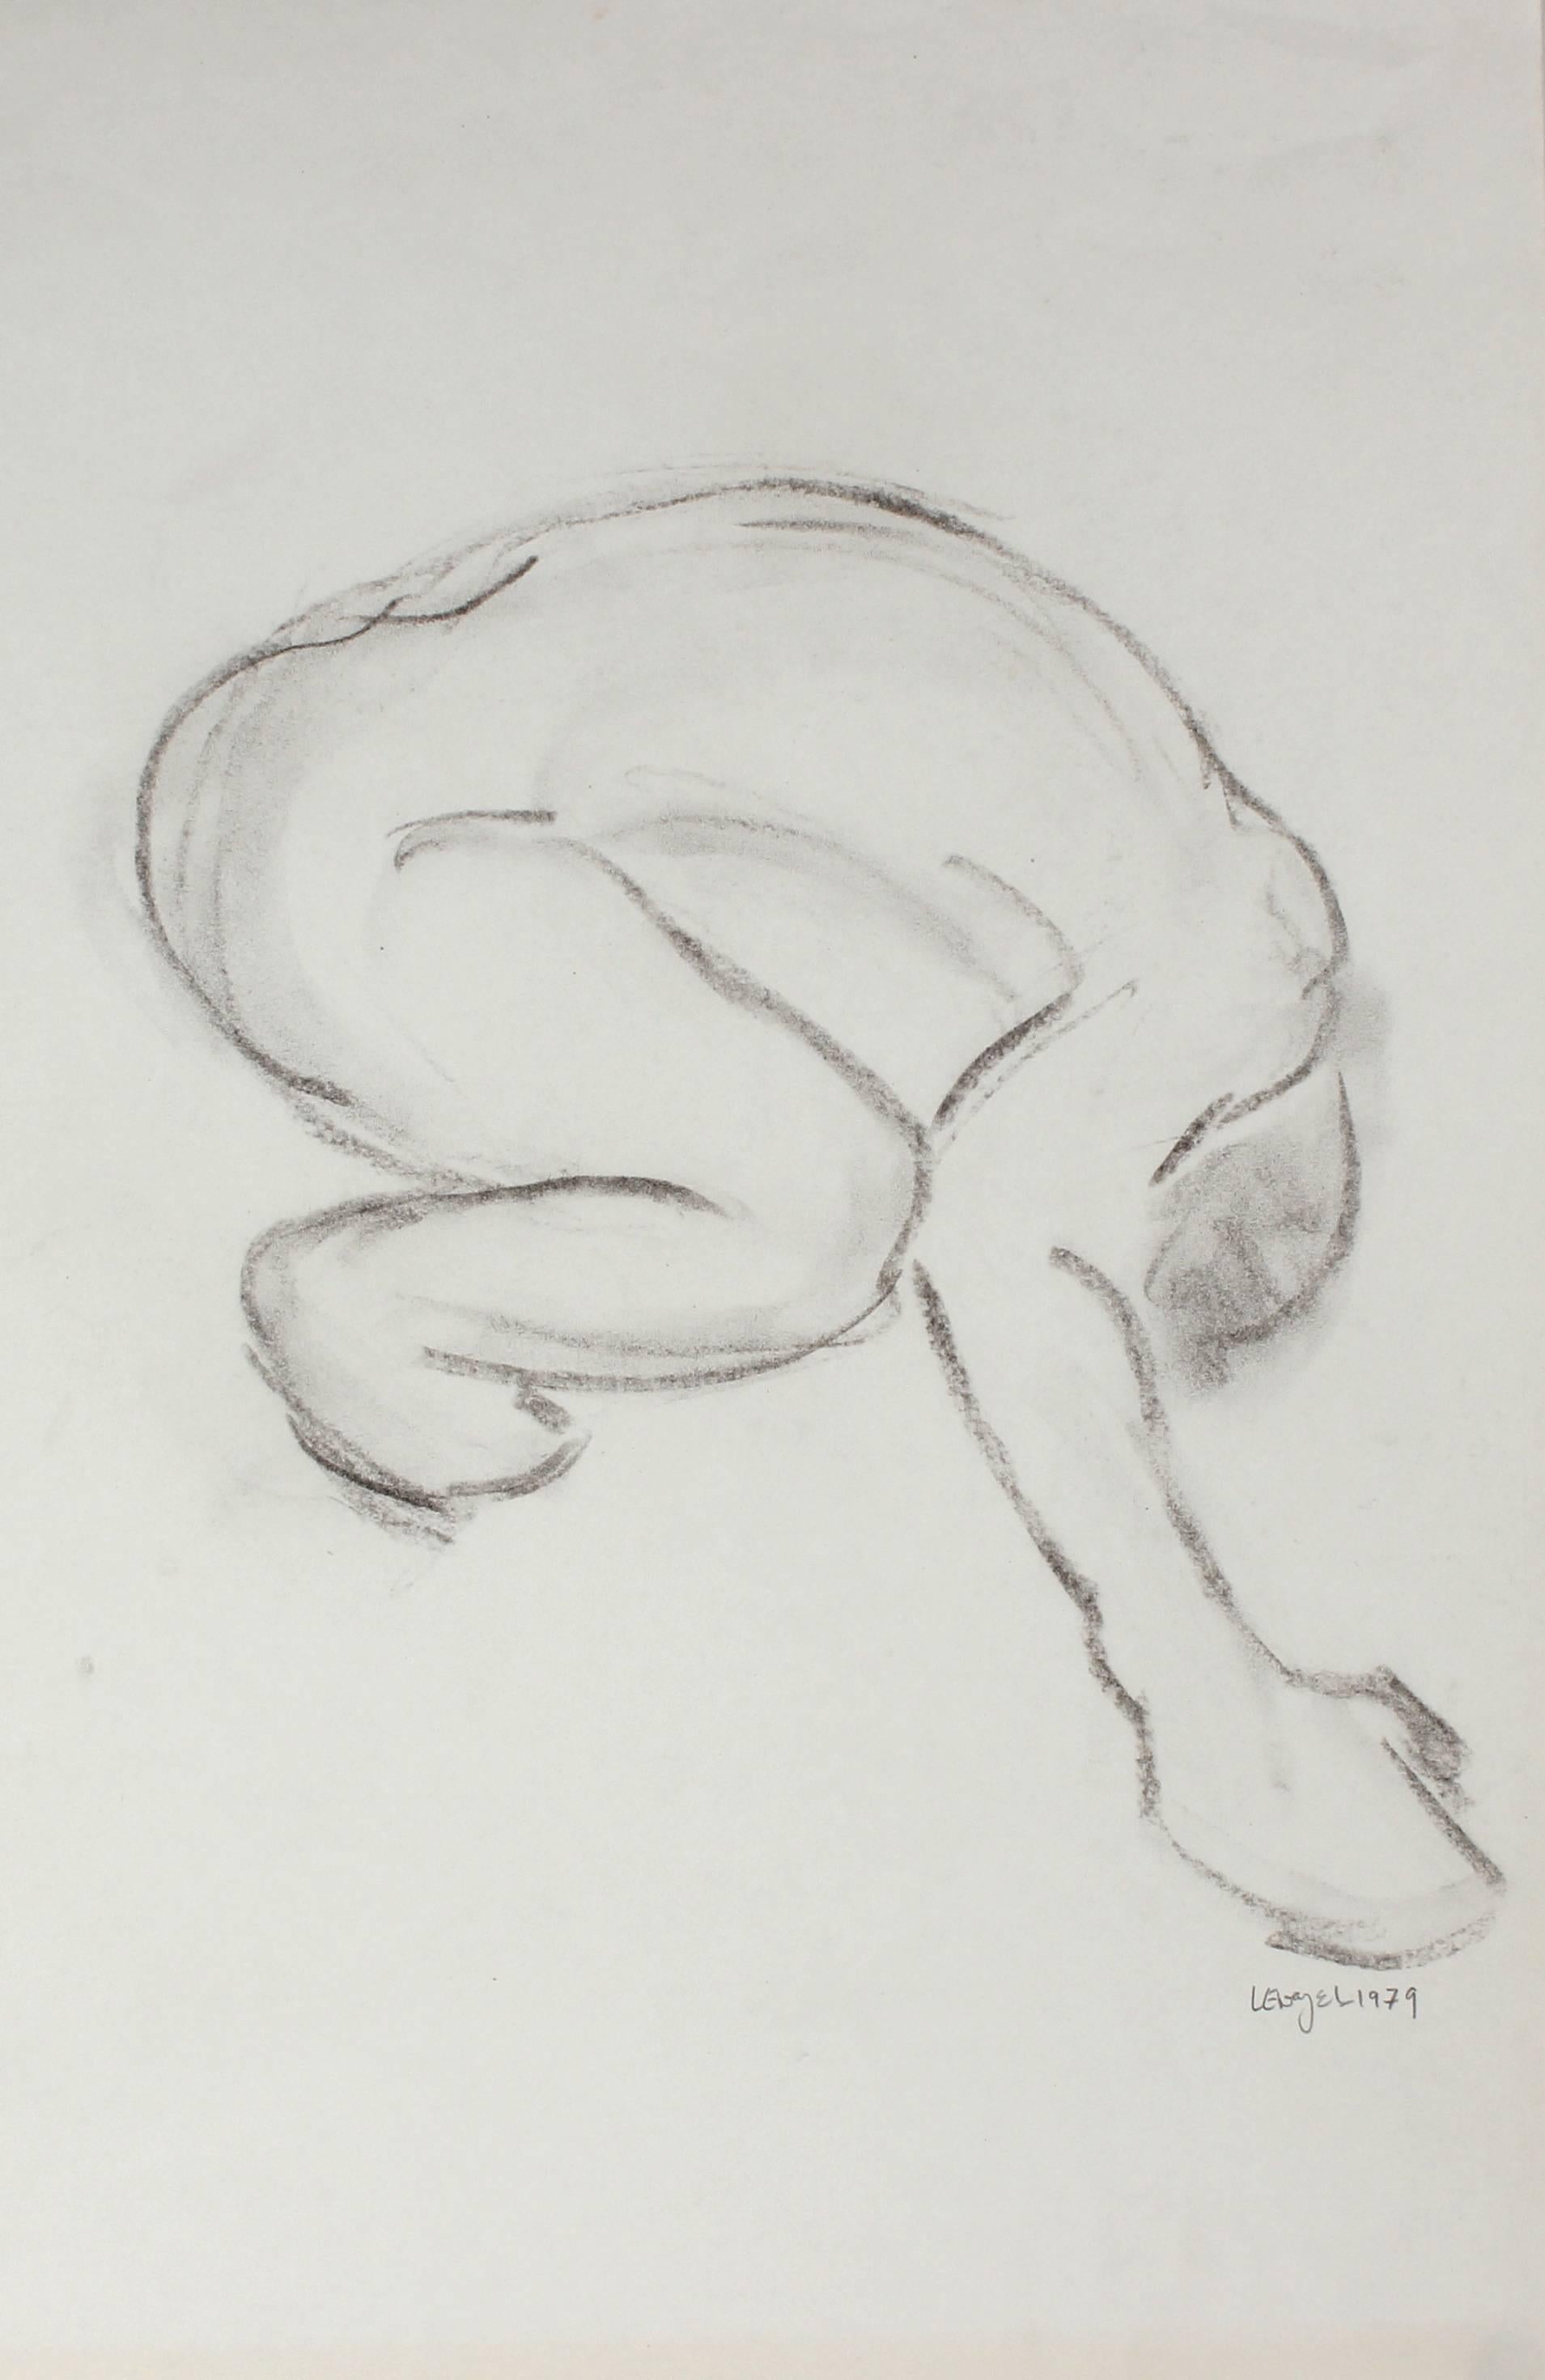 Crouching Monochromatic Figure in Charcoal, 1979